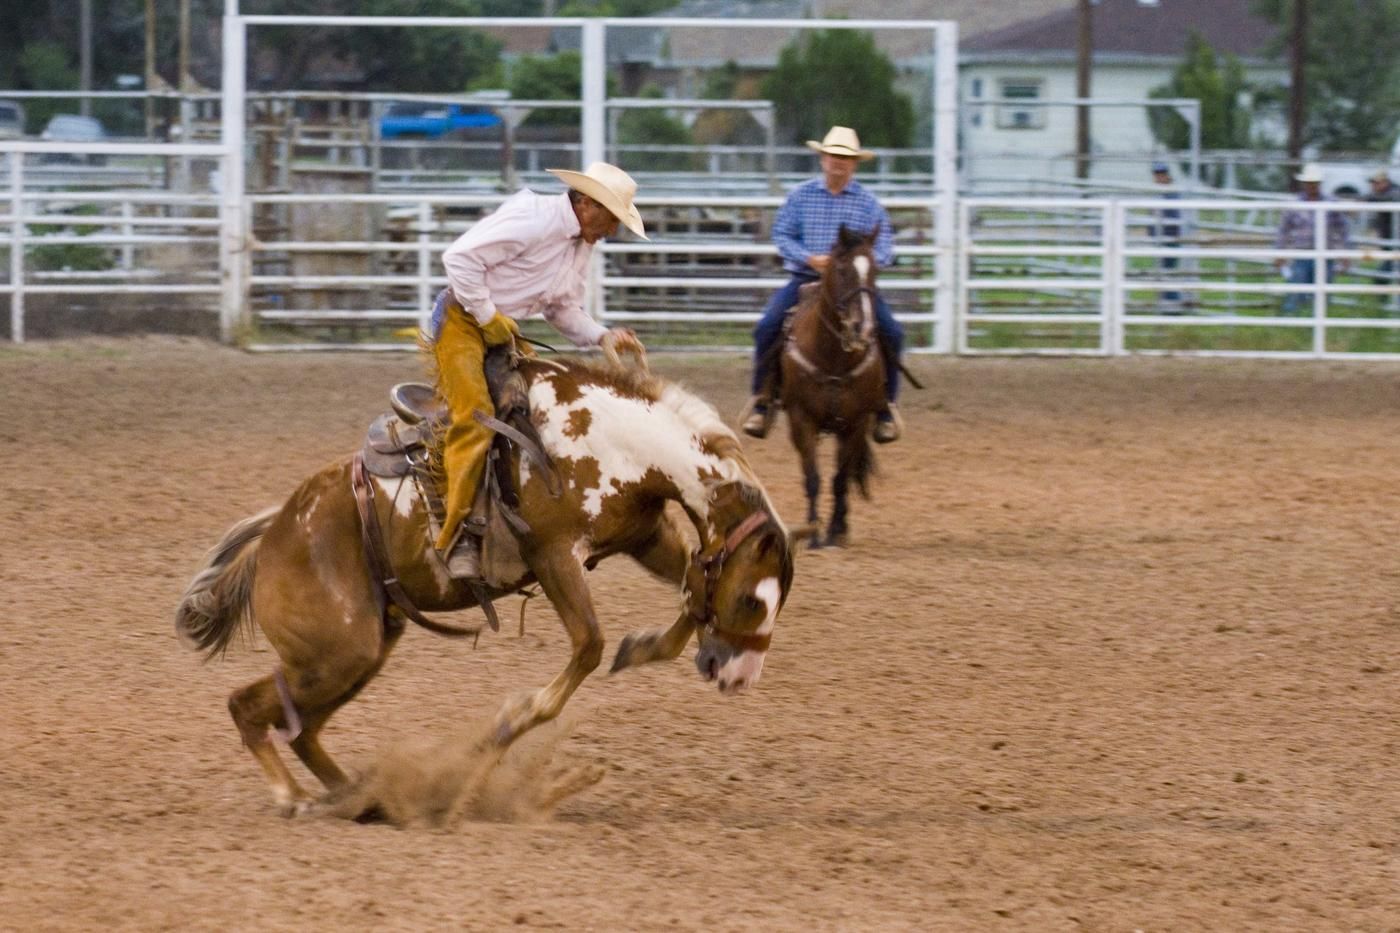 pro rodeo cowboy on horse jumping or about to